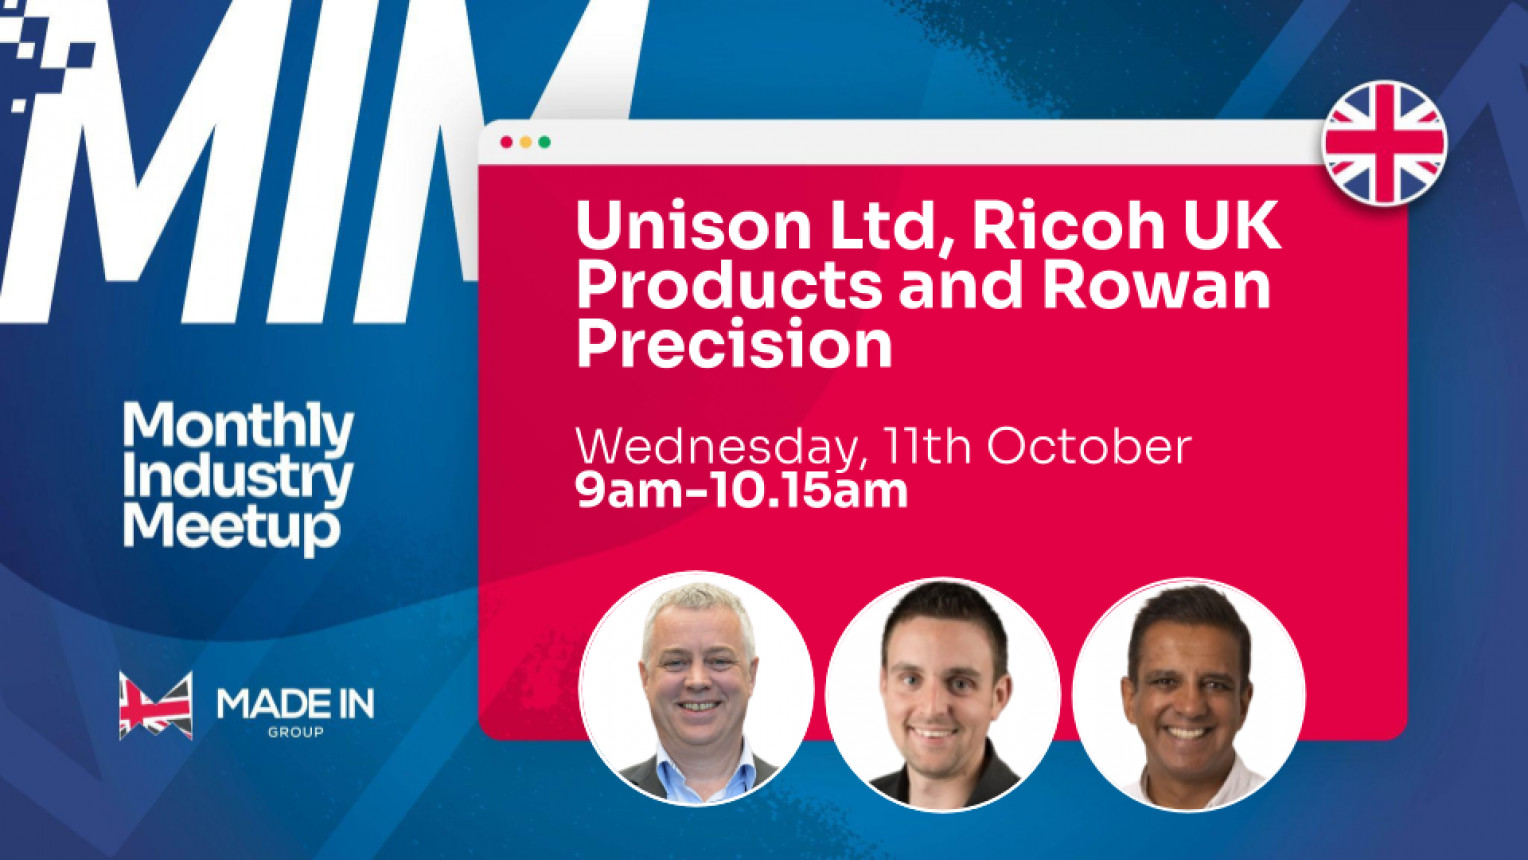 Monthly Industry Meetup with Unison, Ricoh UK Products and Rowan Precision